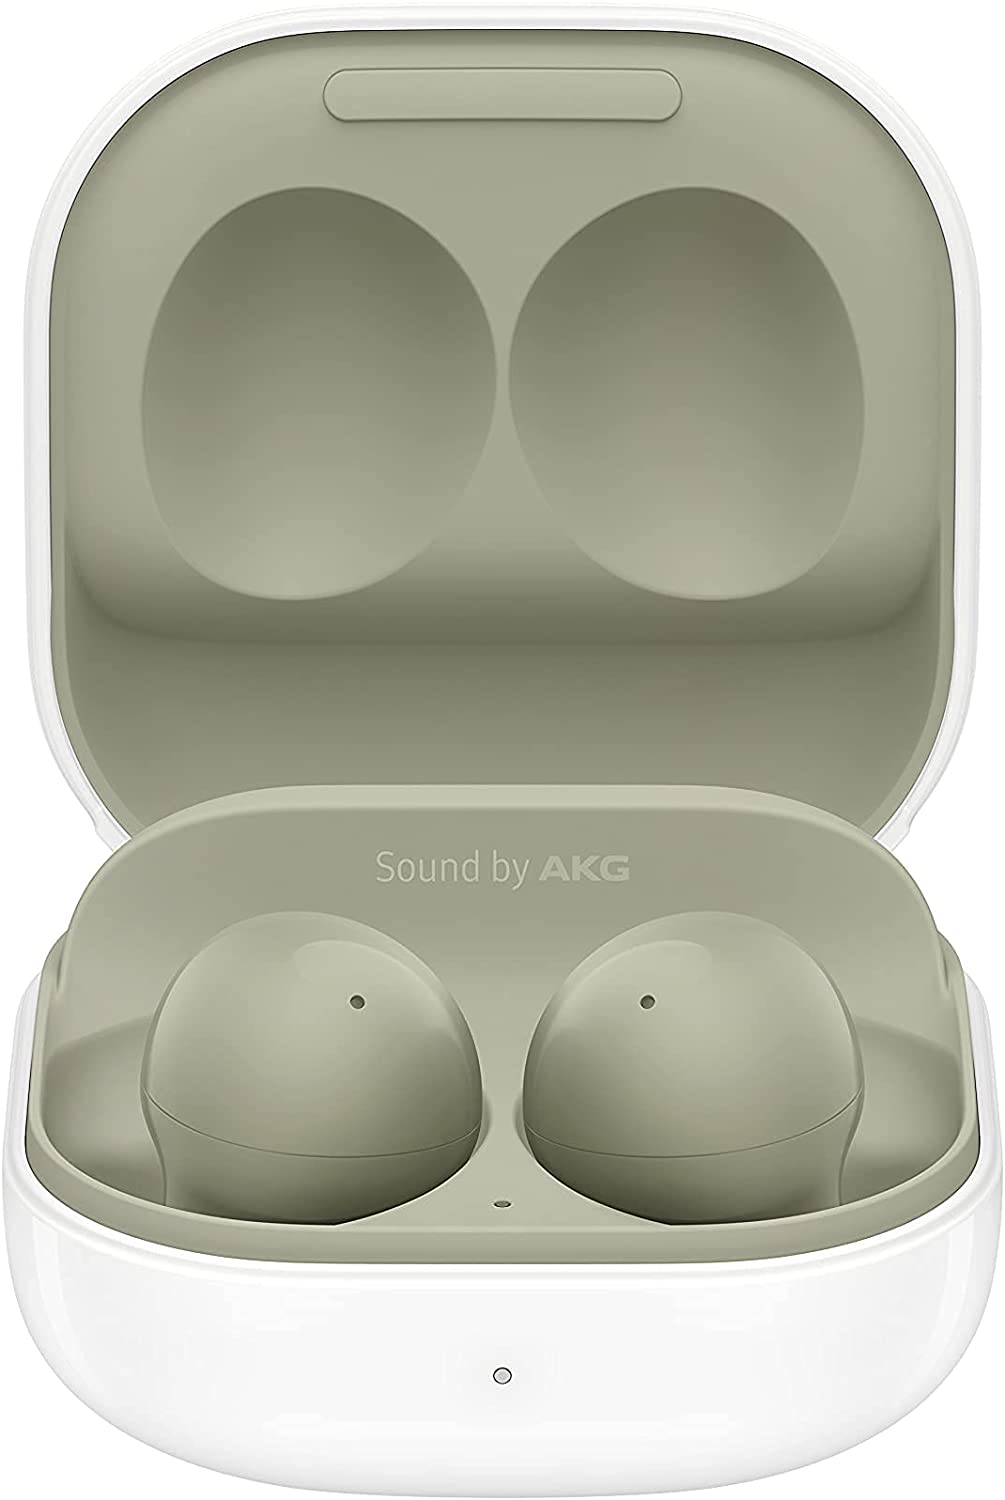 Samsung Galaxy Buds2 True Wireless Noise Cancelling Bluetooth Earbuds - Olive (Certified Refurbished)